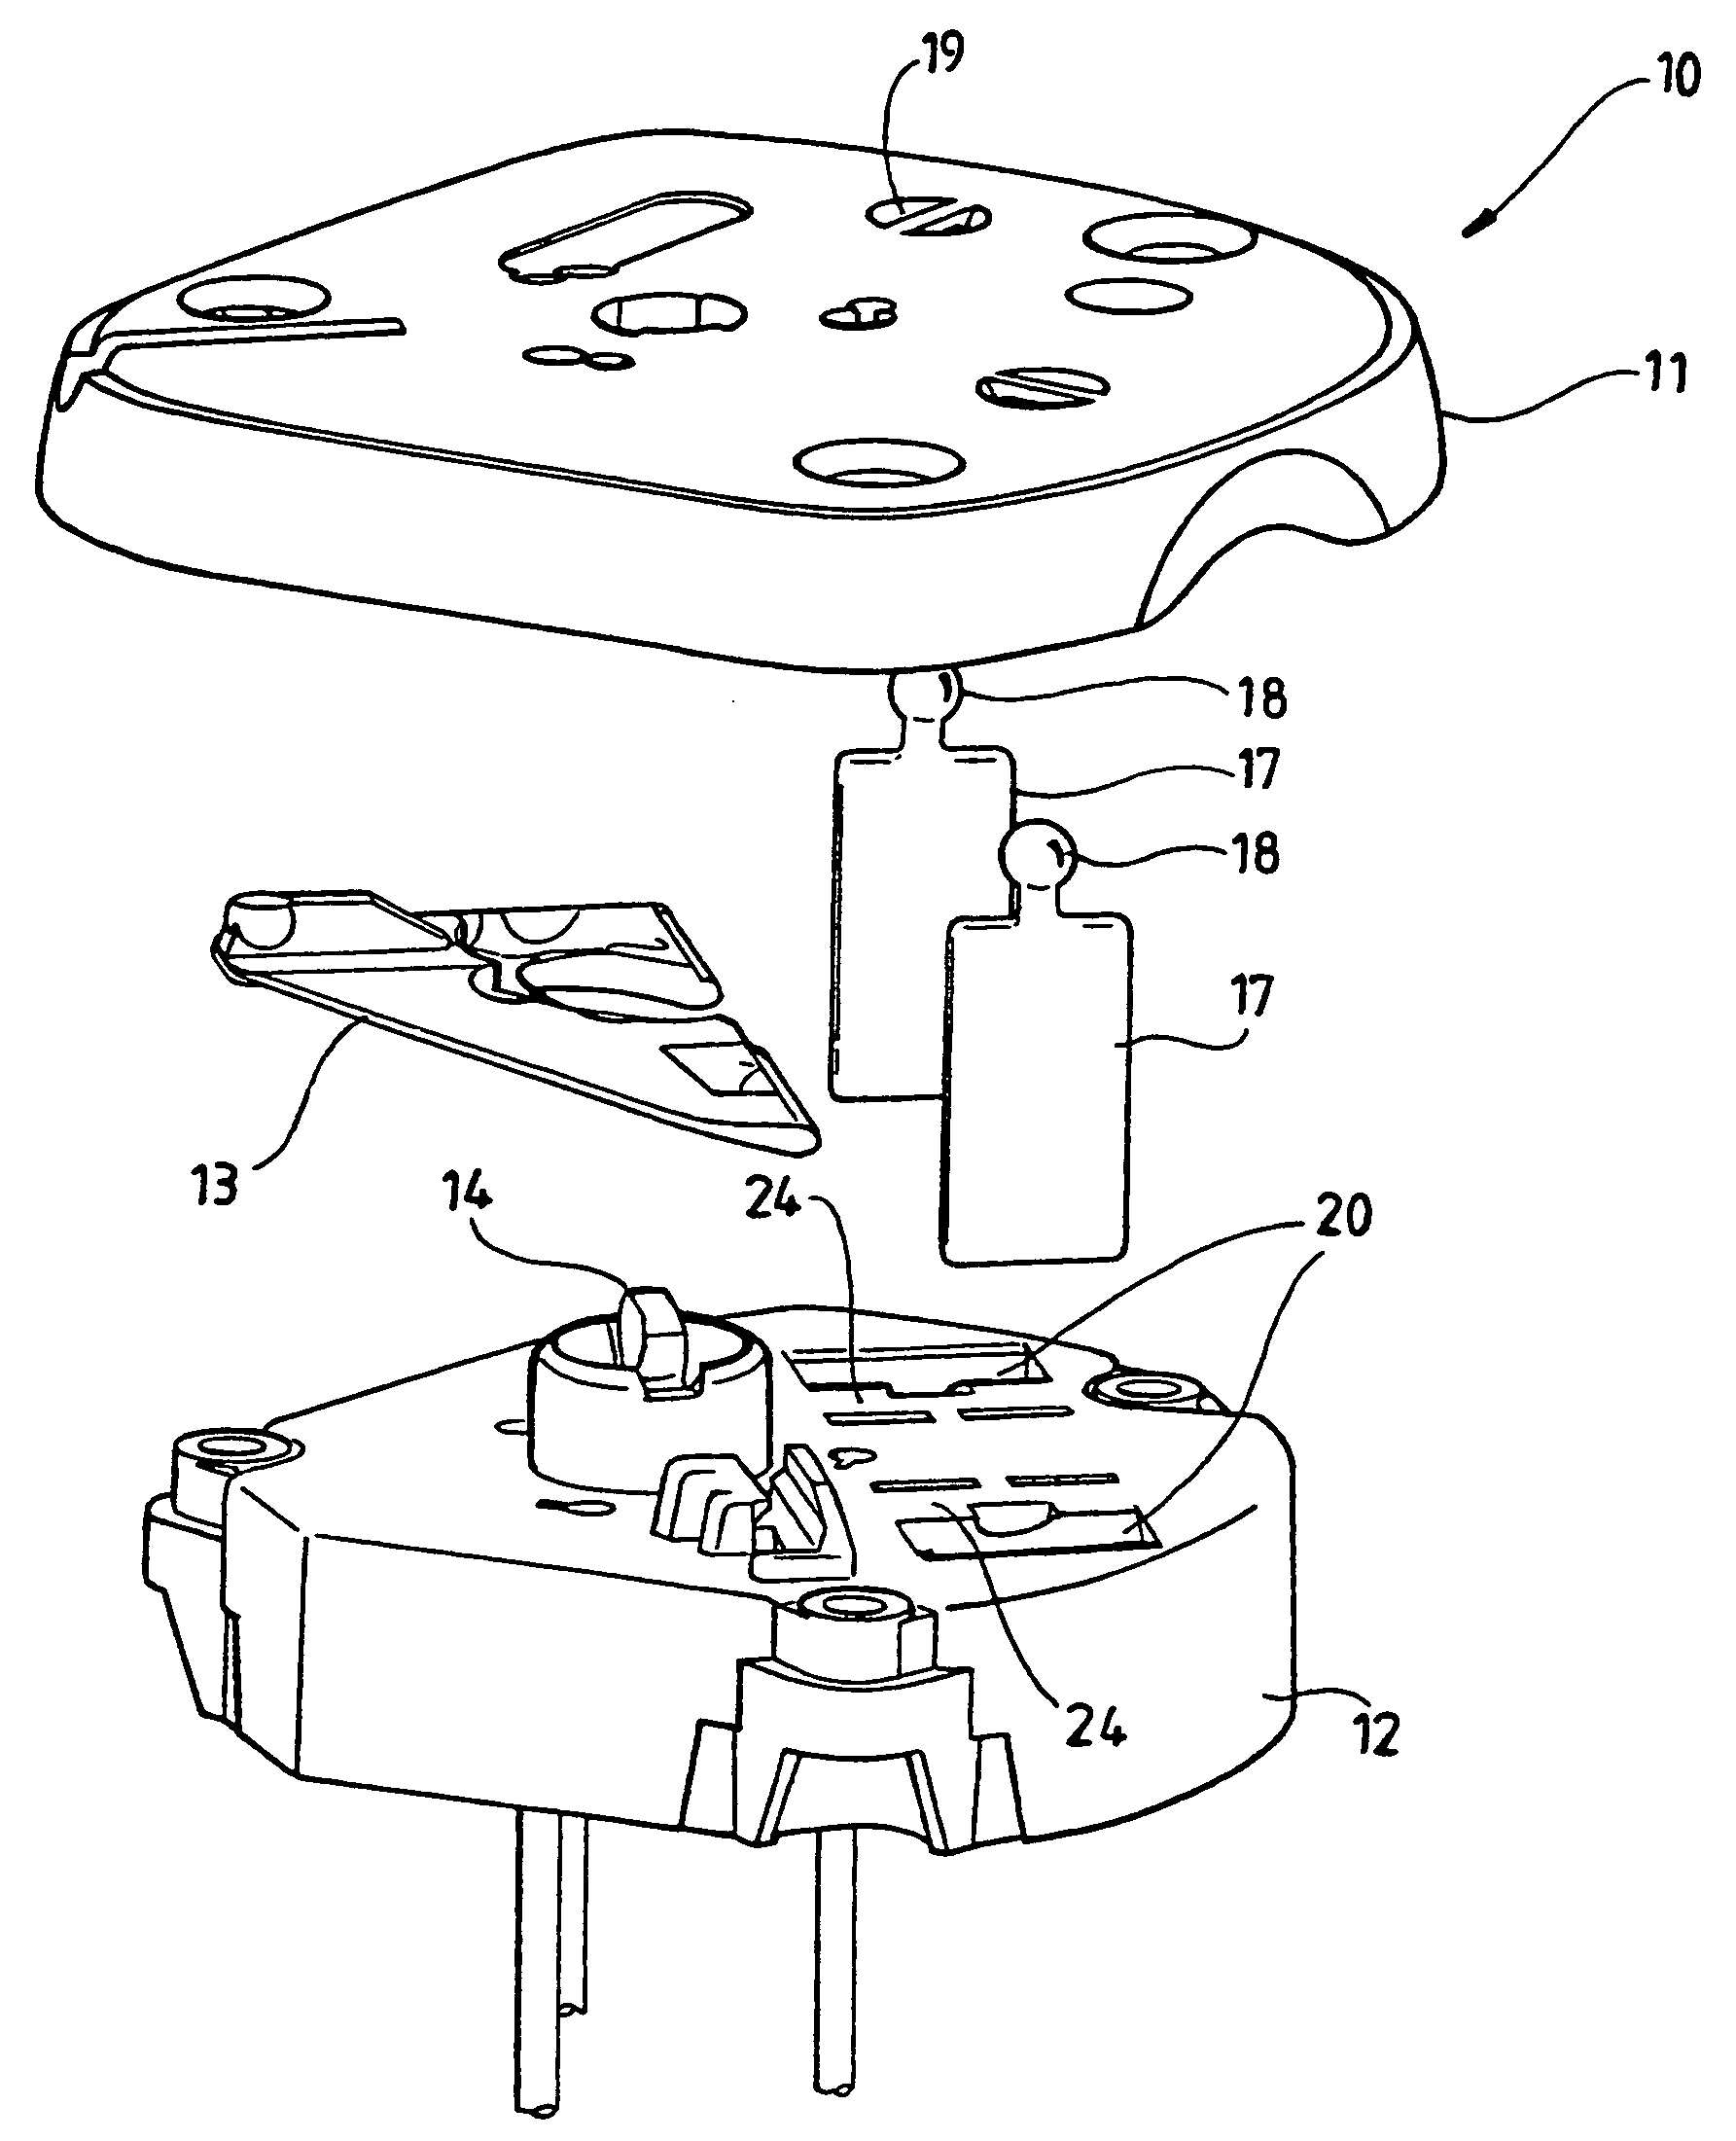 Mirror mounting assembly for controlling vibration of a mirror